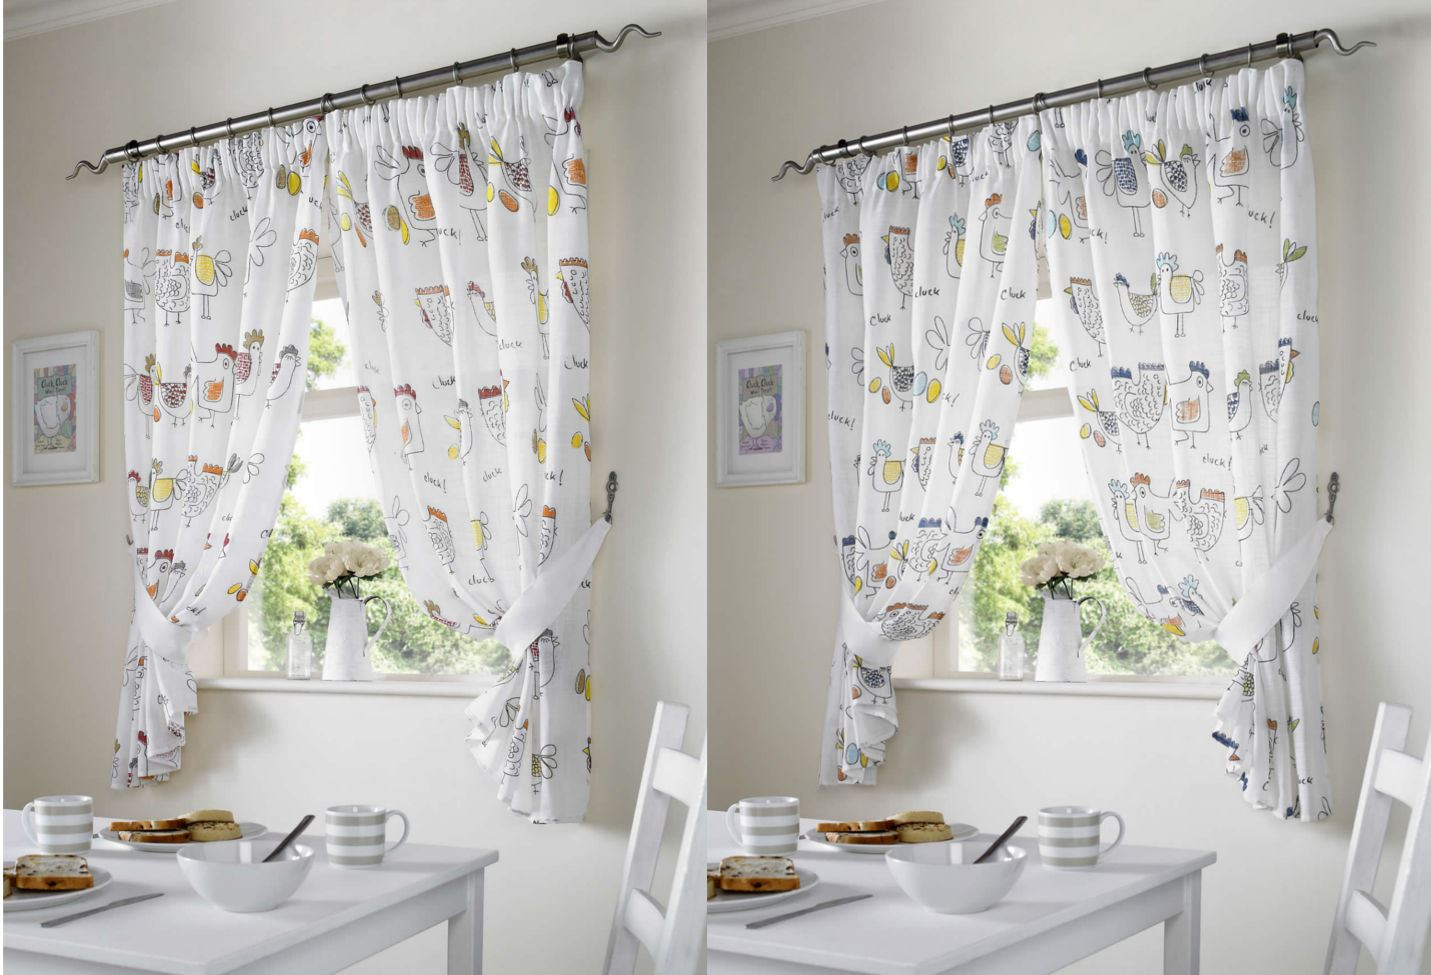 Curtains For Kitchen
 CHICKENS ROOSTER COUNTRY STYLE KITCHEN CURTAIN SET WINDOW